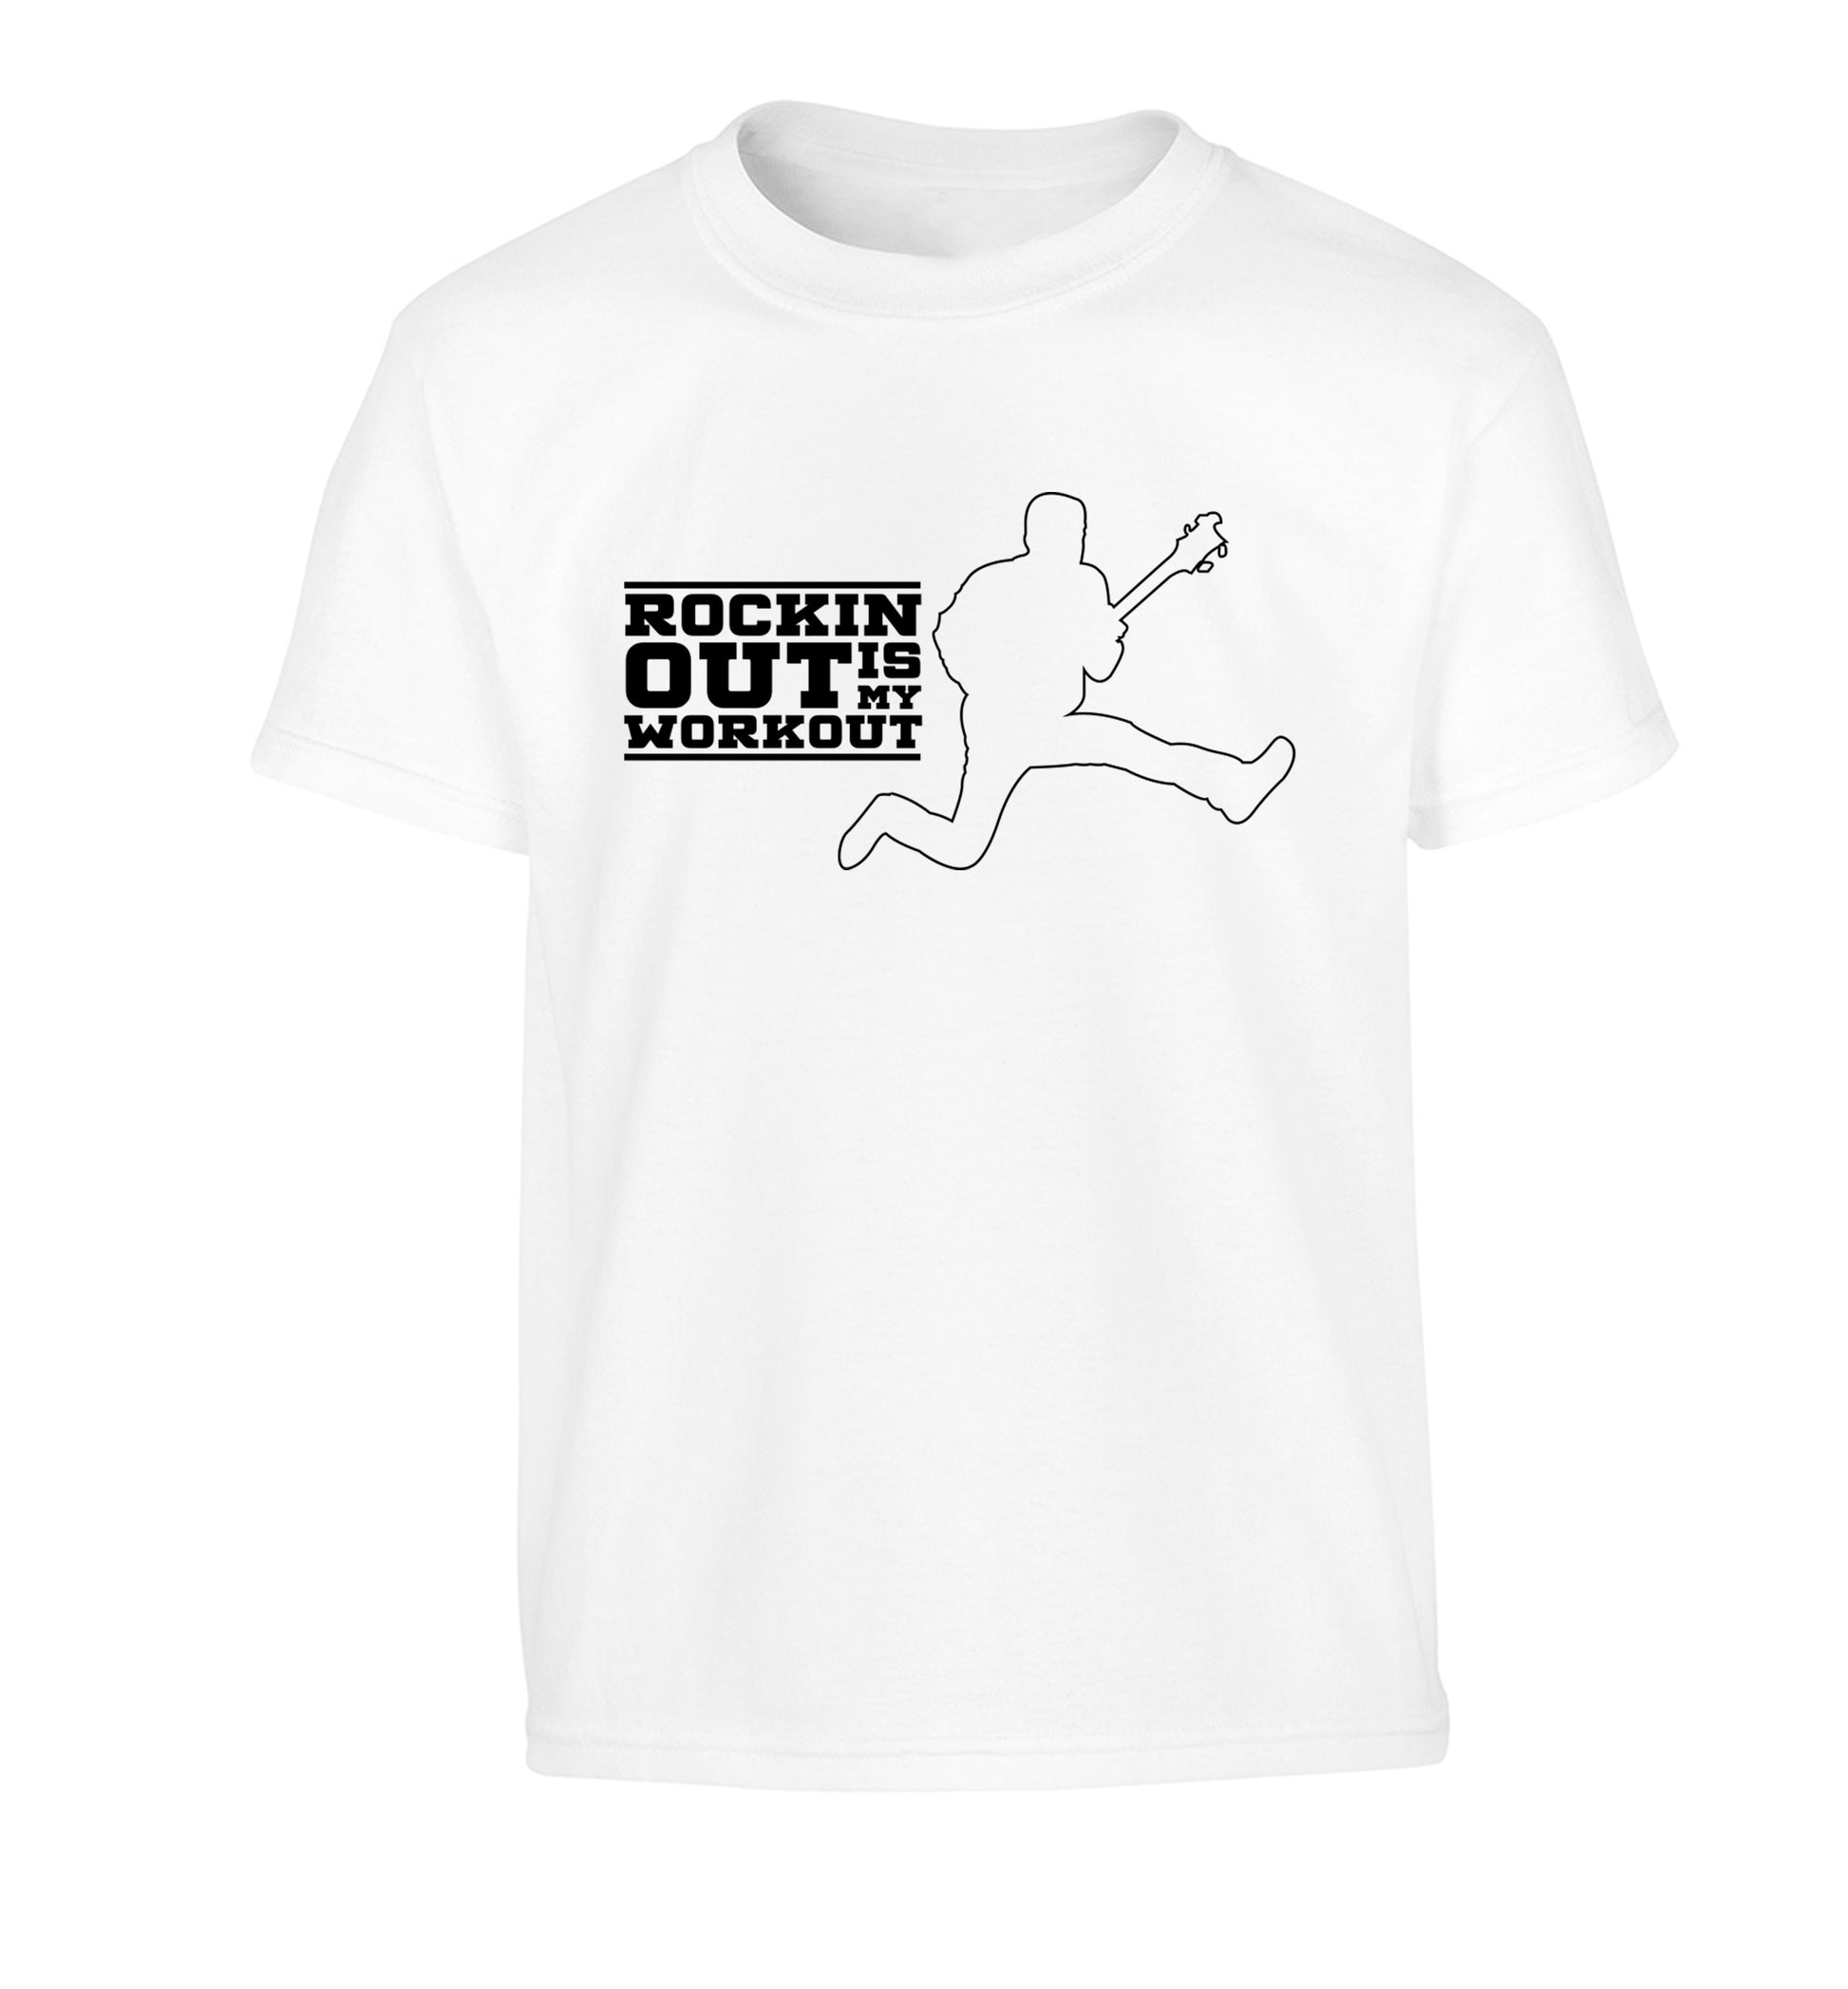 Rockin out is my workout Children's white Tshirt 12-13 Years